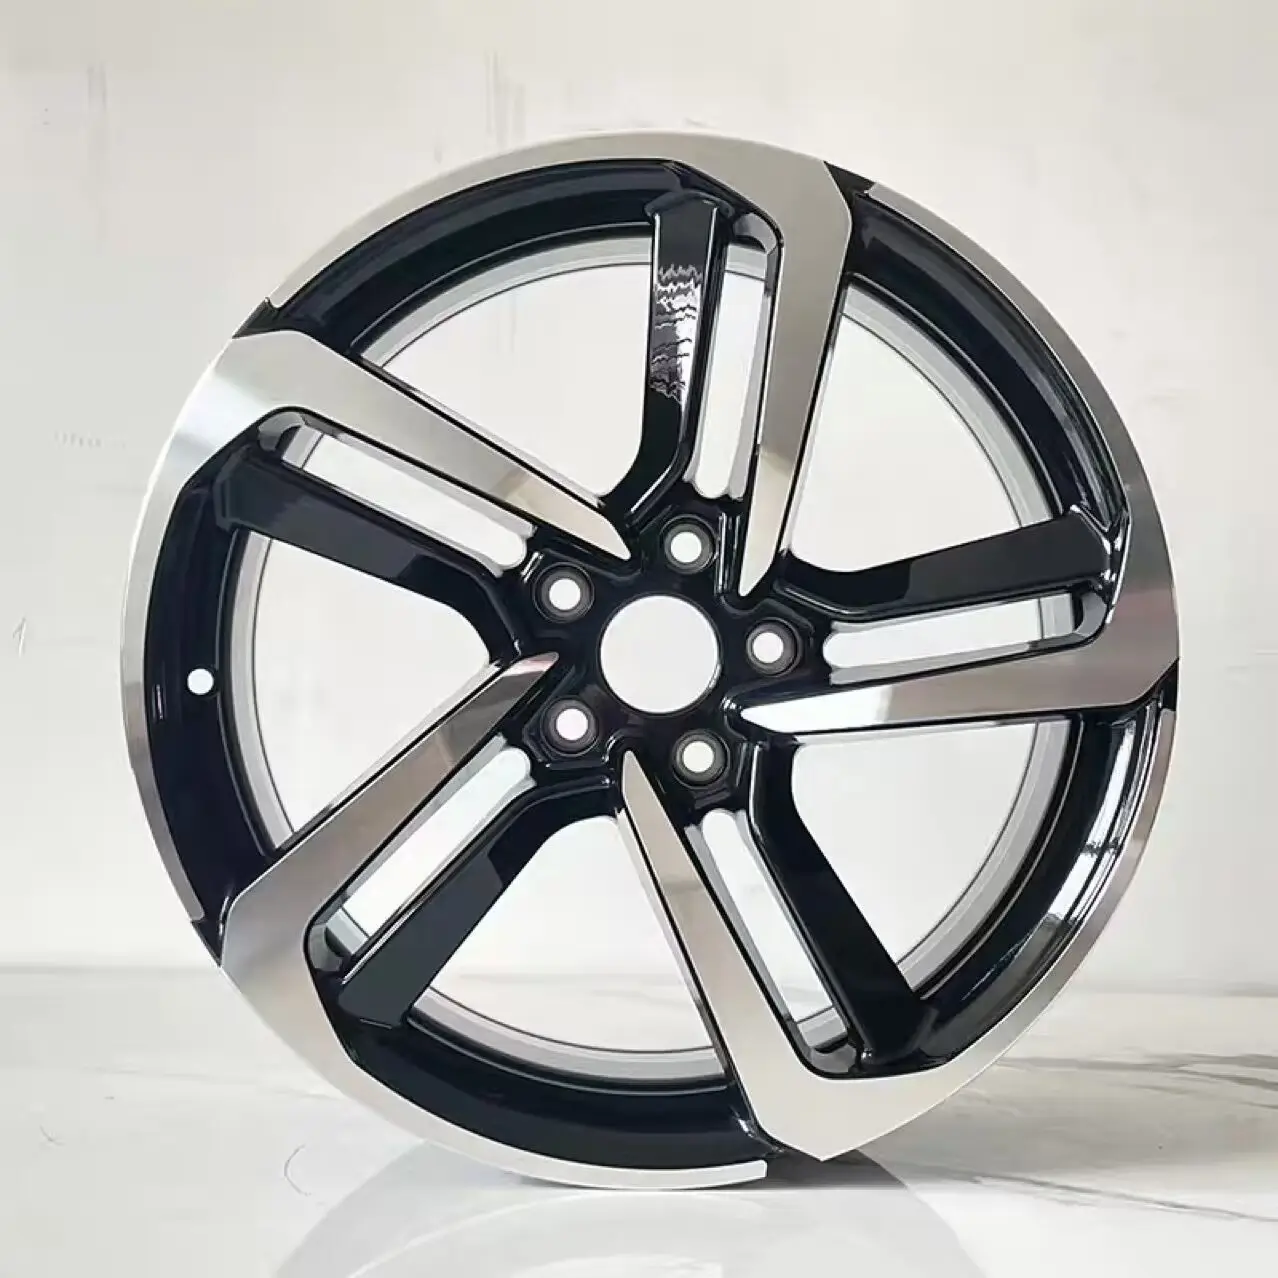 17-19 Inch Fitment Modified Wheel for Civic Accord Hao Shadow Colorado Chi Ling Faction U.S. Version Machining Services